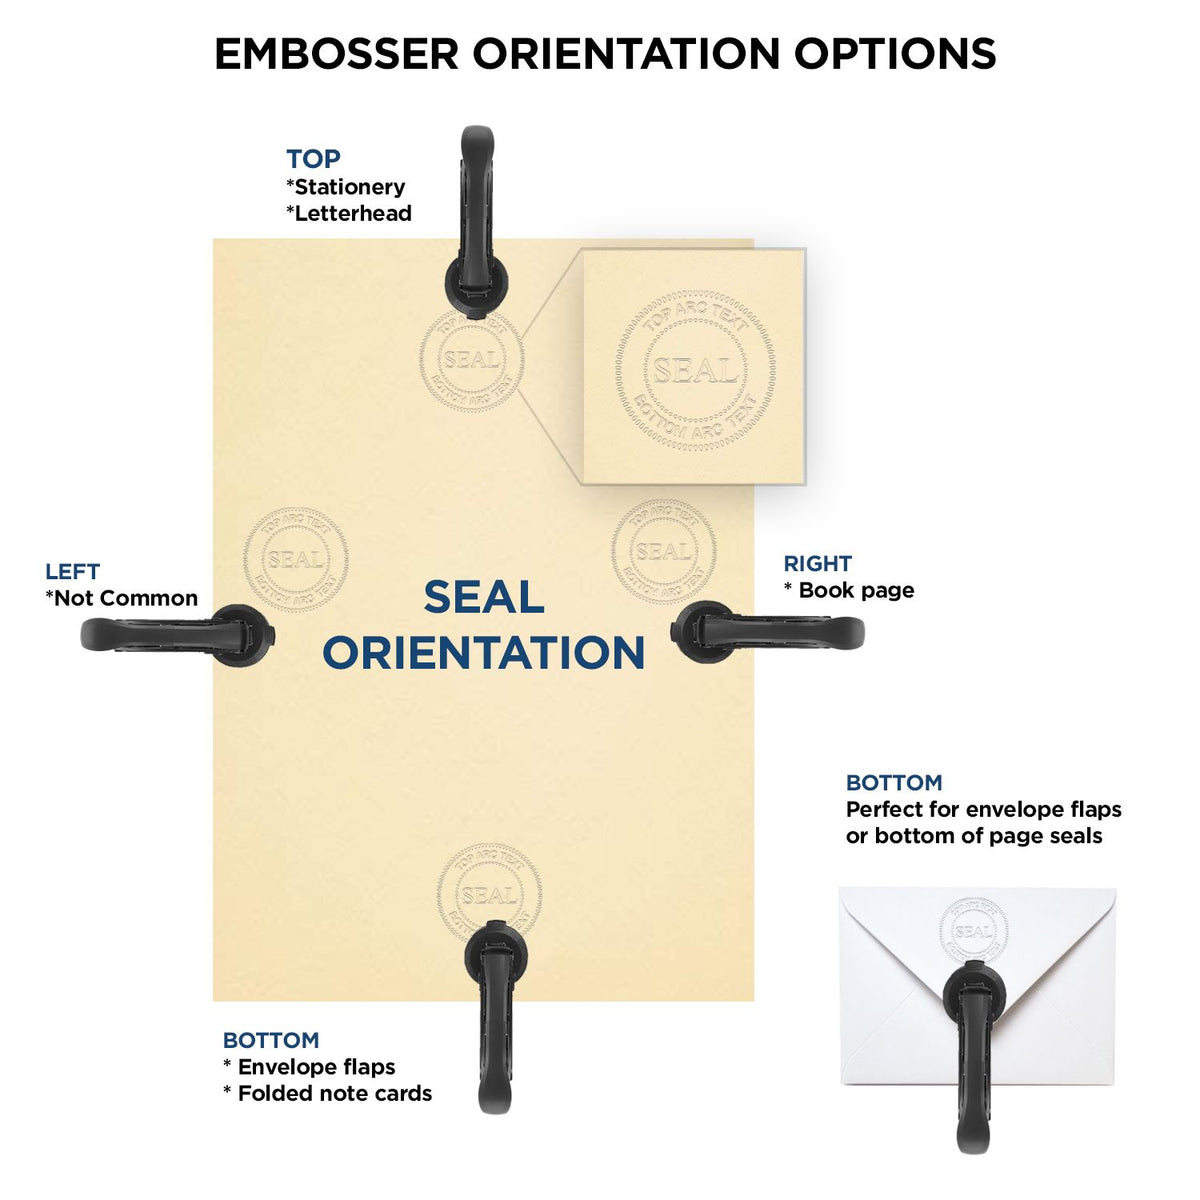 An infographic for the State of Alabama Long Reach Architectural Embossing Seal showing embosser orientation, this is showing examples of a top, bottom, right and left insert.